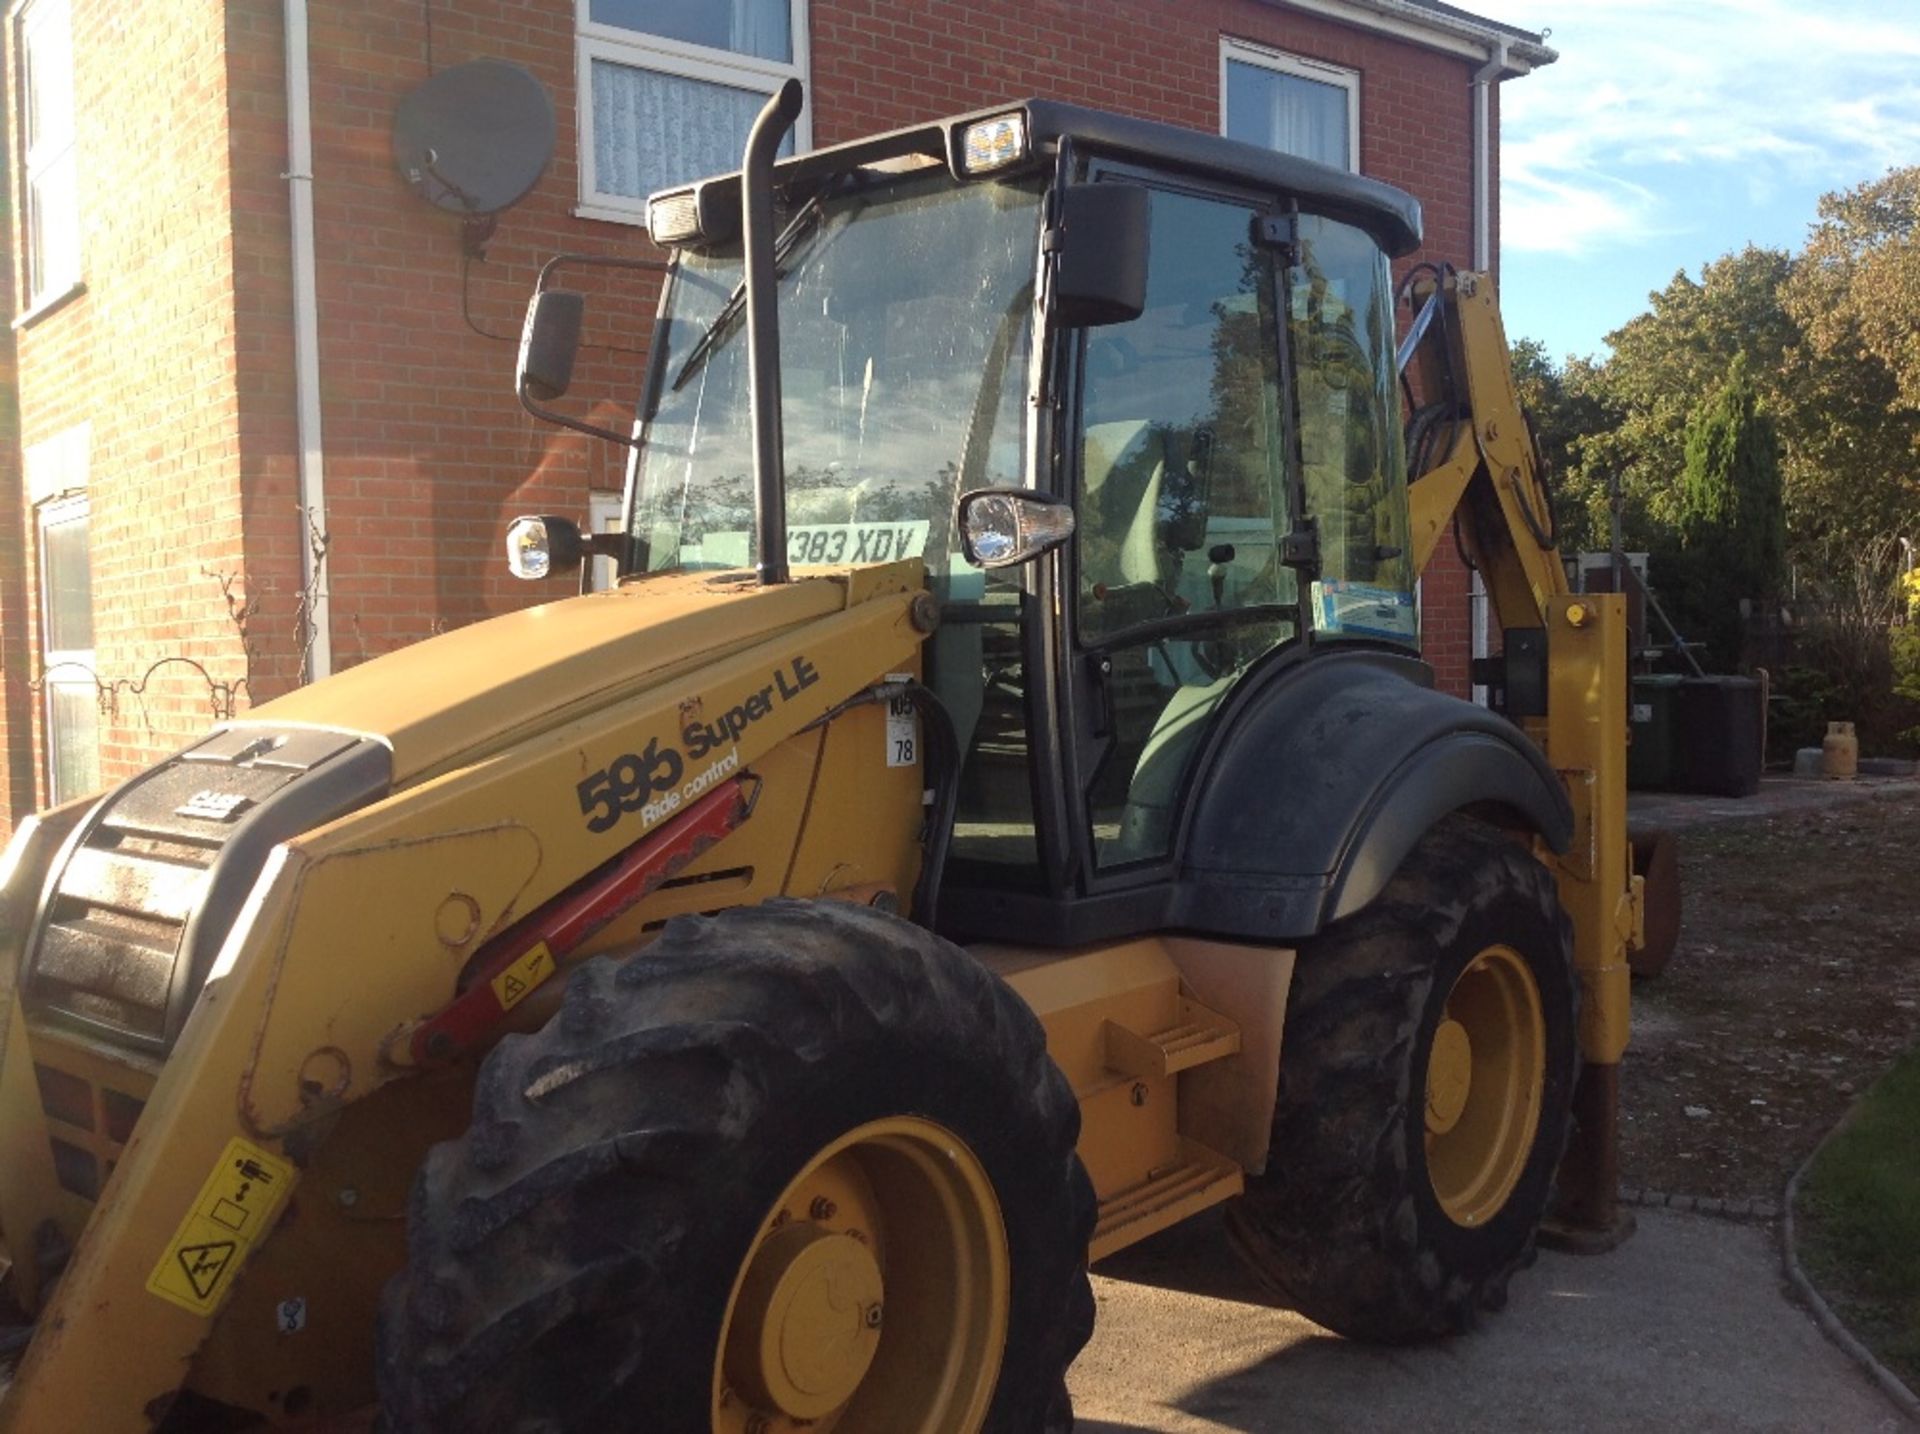 Case 595SLE Backhoe Loader, 4 in 1 front bucket with forks, telescopic rear dipper with 3 buckets, - Image 2 of 4